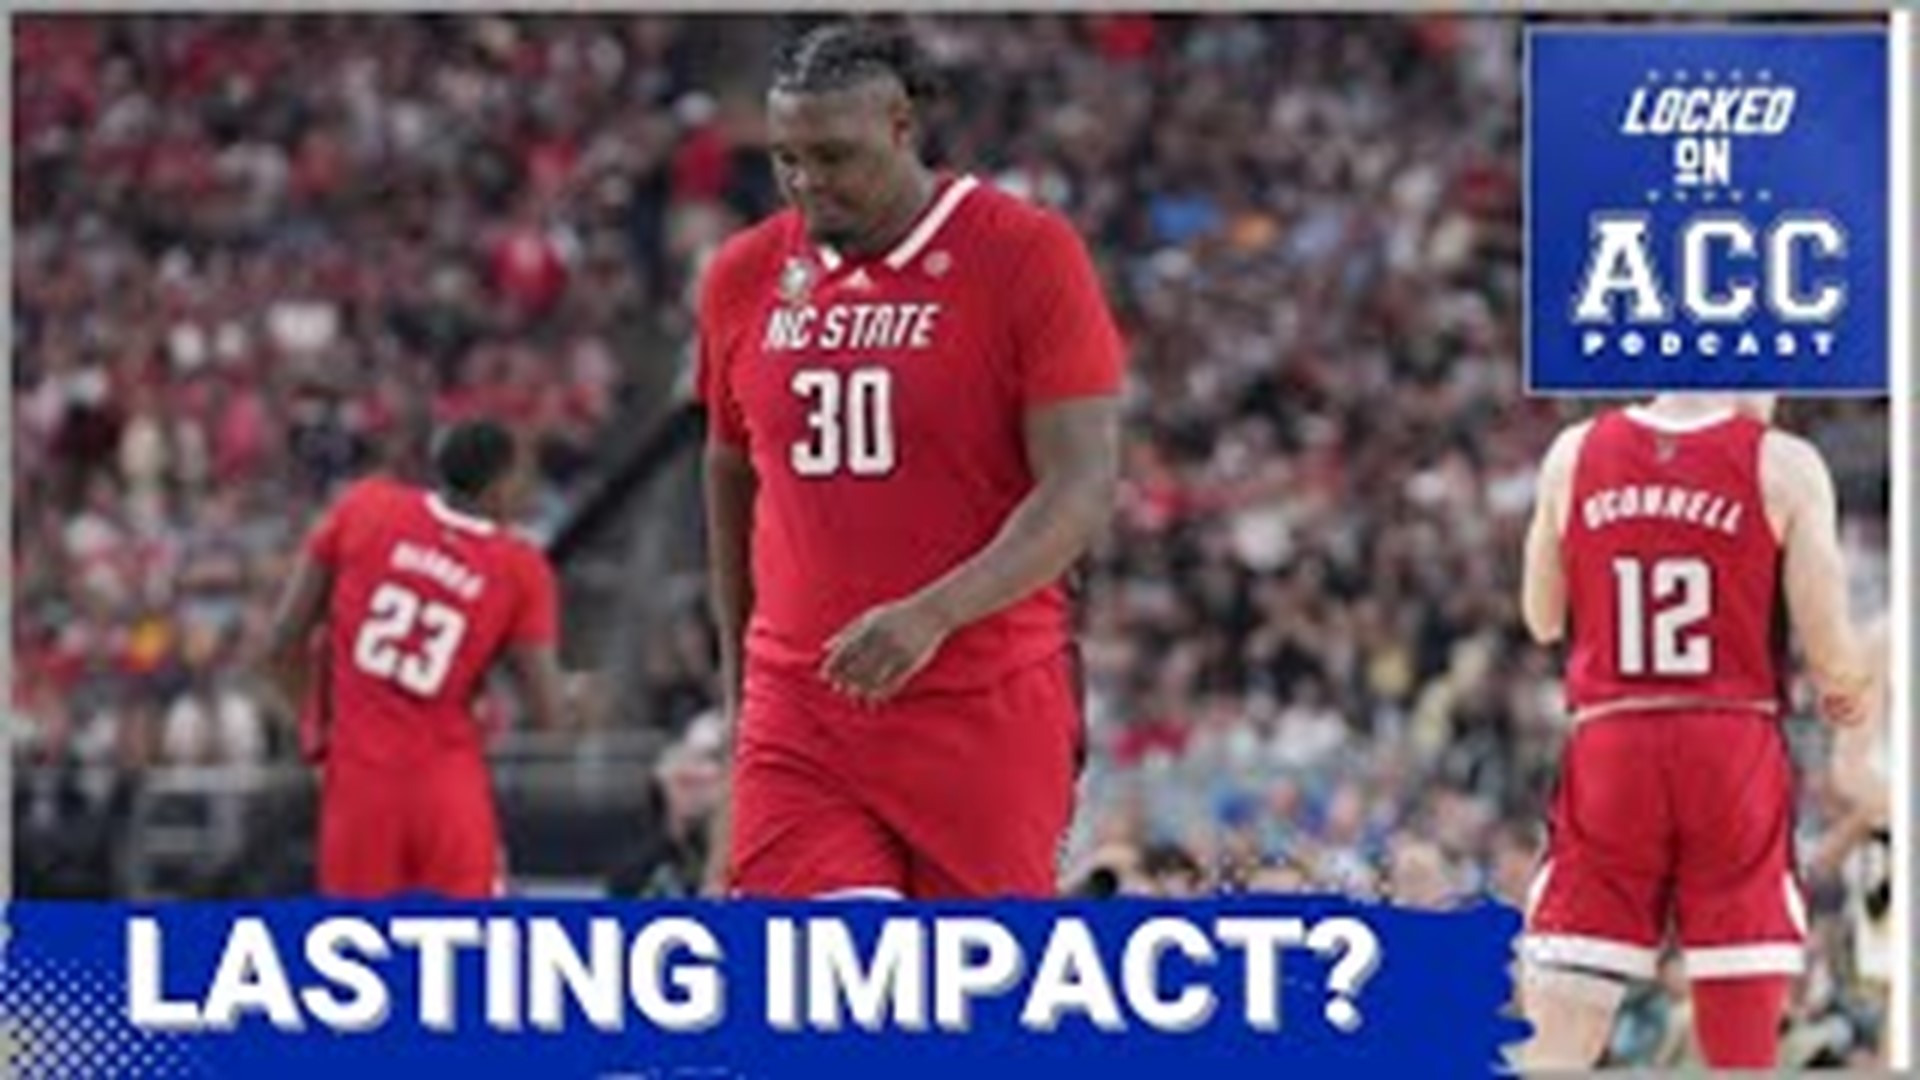 NC State’s magical run through the NCAA tournament came to an end in their Final Four loss to Purdue. Will the Wolfpack leave a lasting impact?